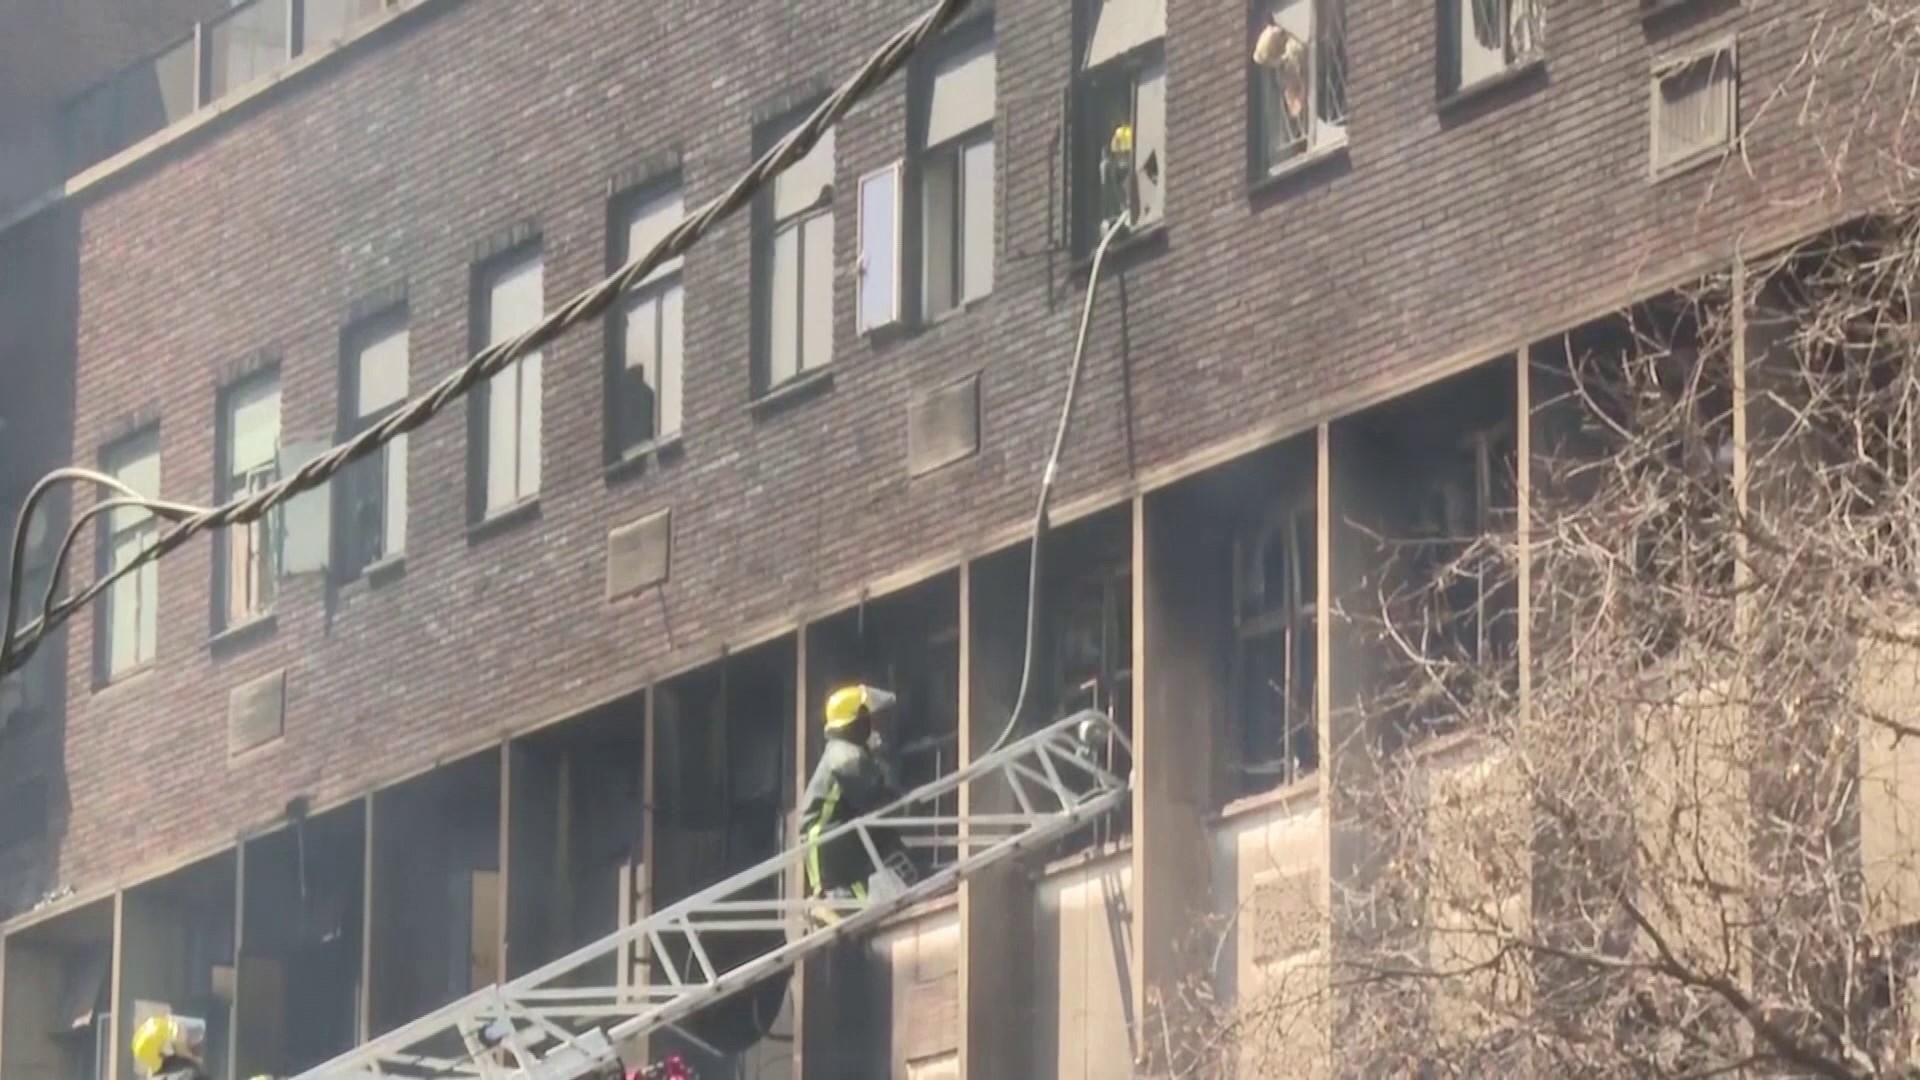 A fire in a 5-story apartment building in Johannesburg left multiple dead on the night of Aug.